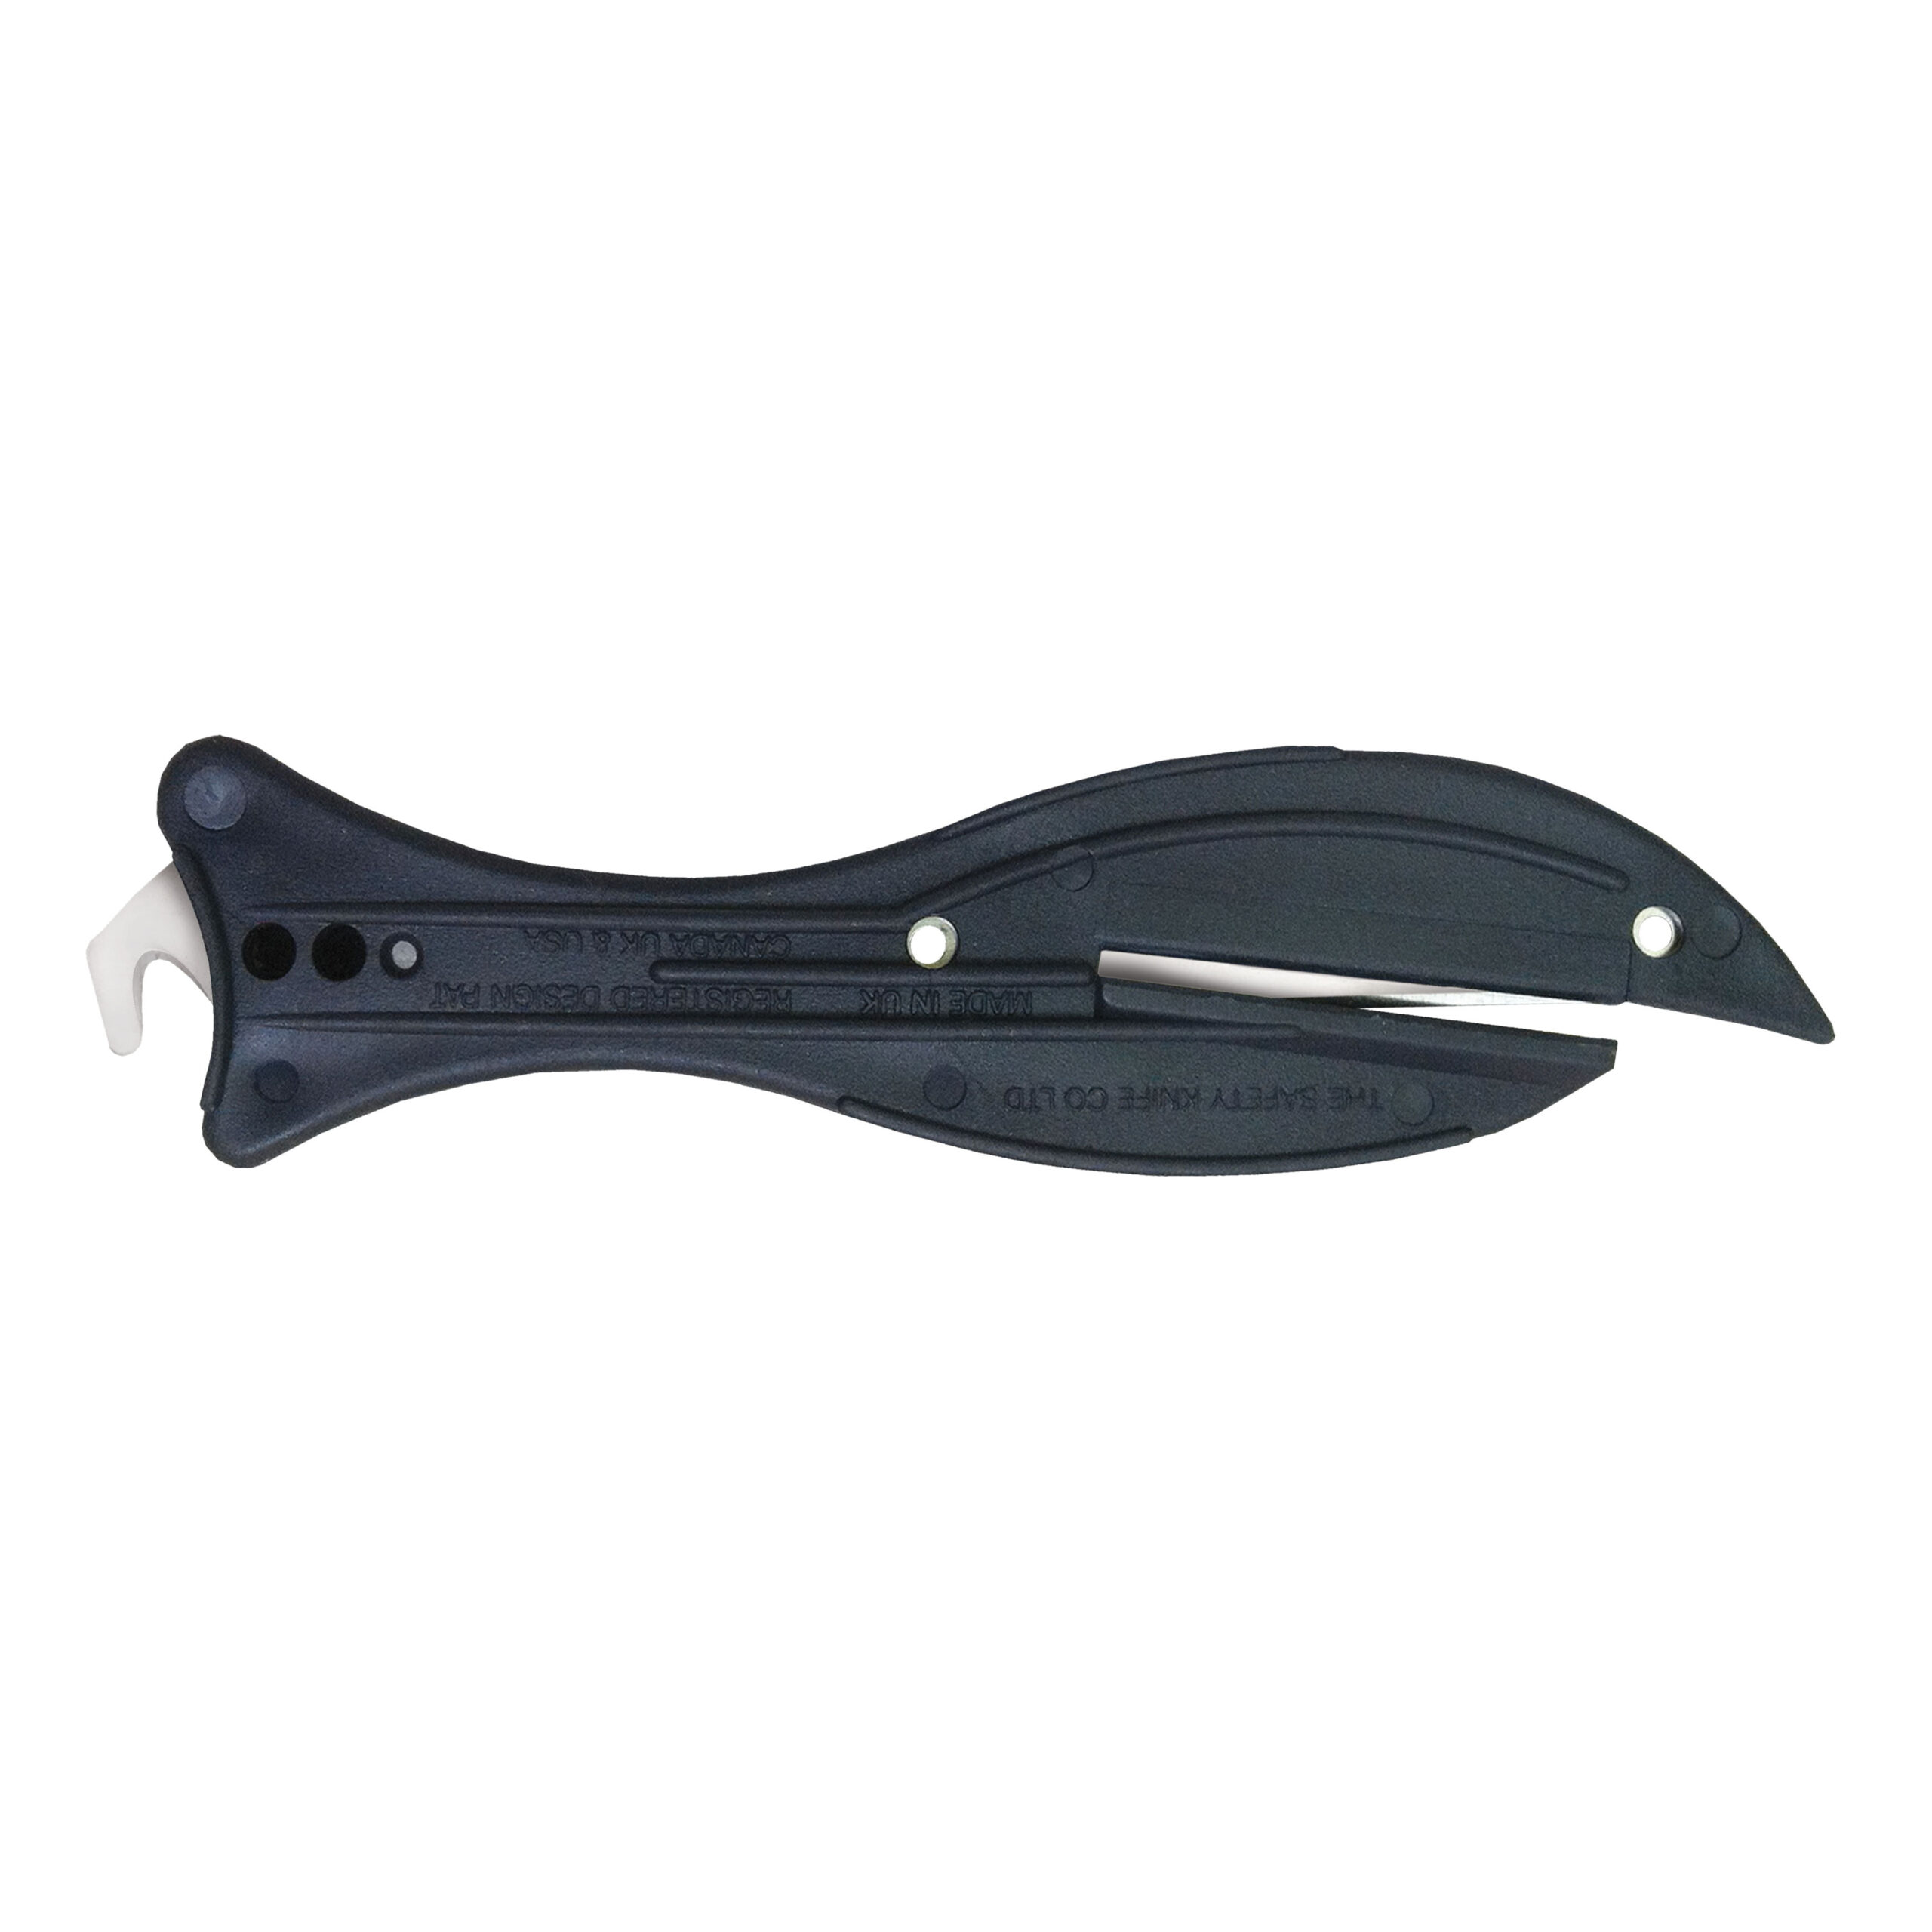 Metal Detectable Safety Knife Fish 600 with Hook Blade Tape Cutter